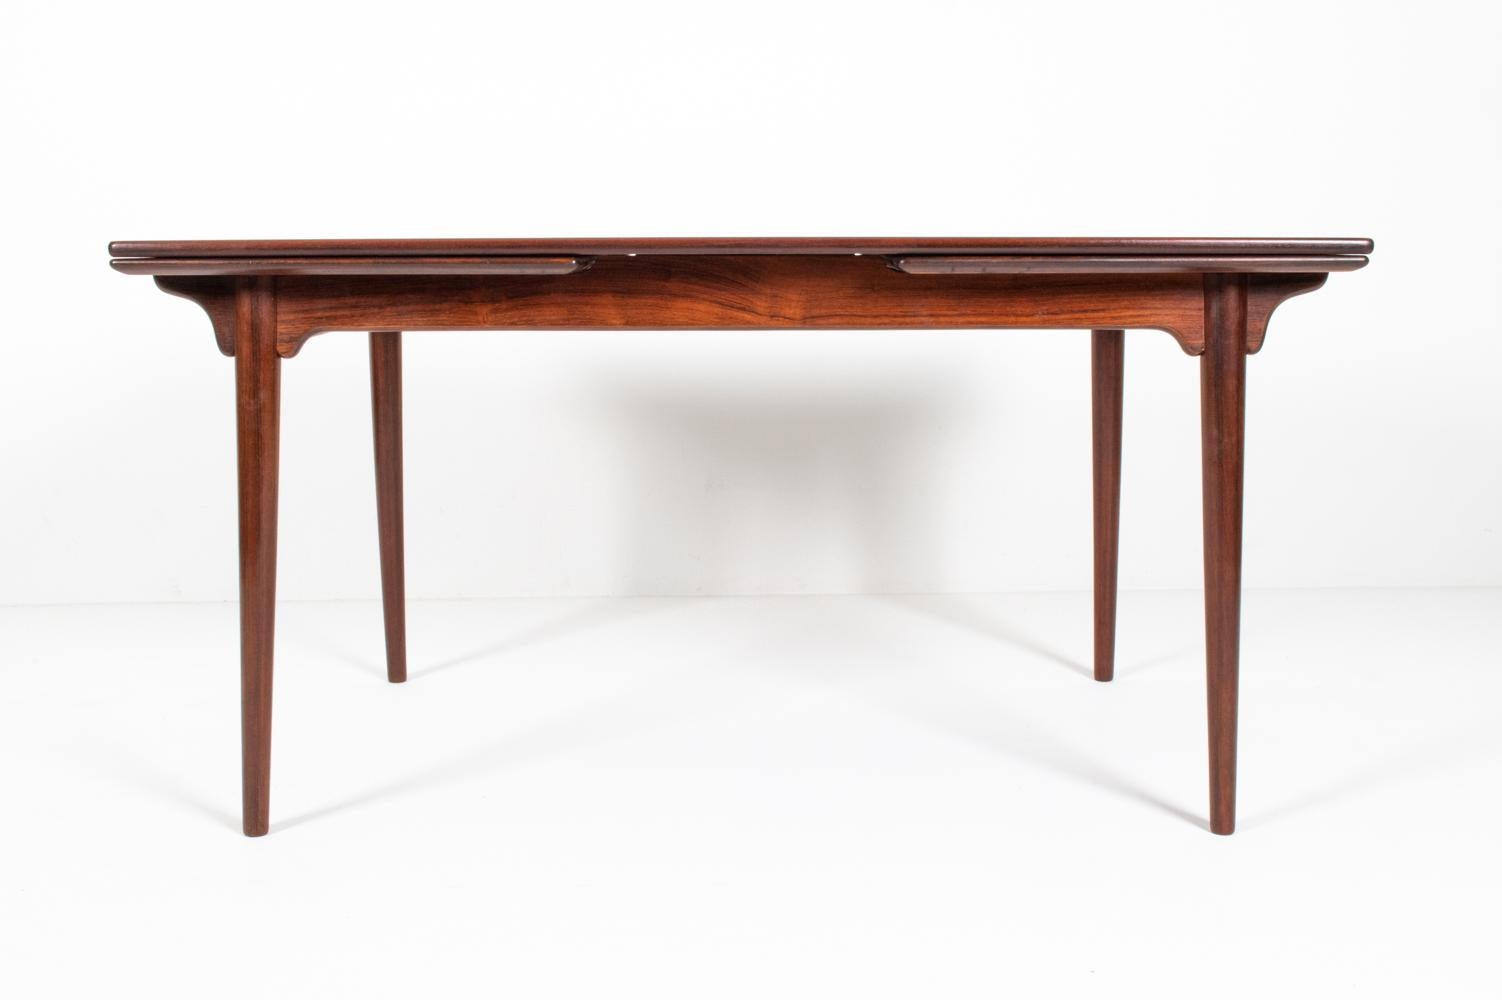 Gunni Omann for Omann Jun Model 54 Draw-Leaf Dining Table in Rosewood In Good Condition For Sale In Norwalk, CT